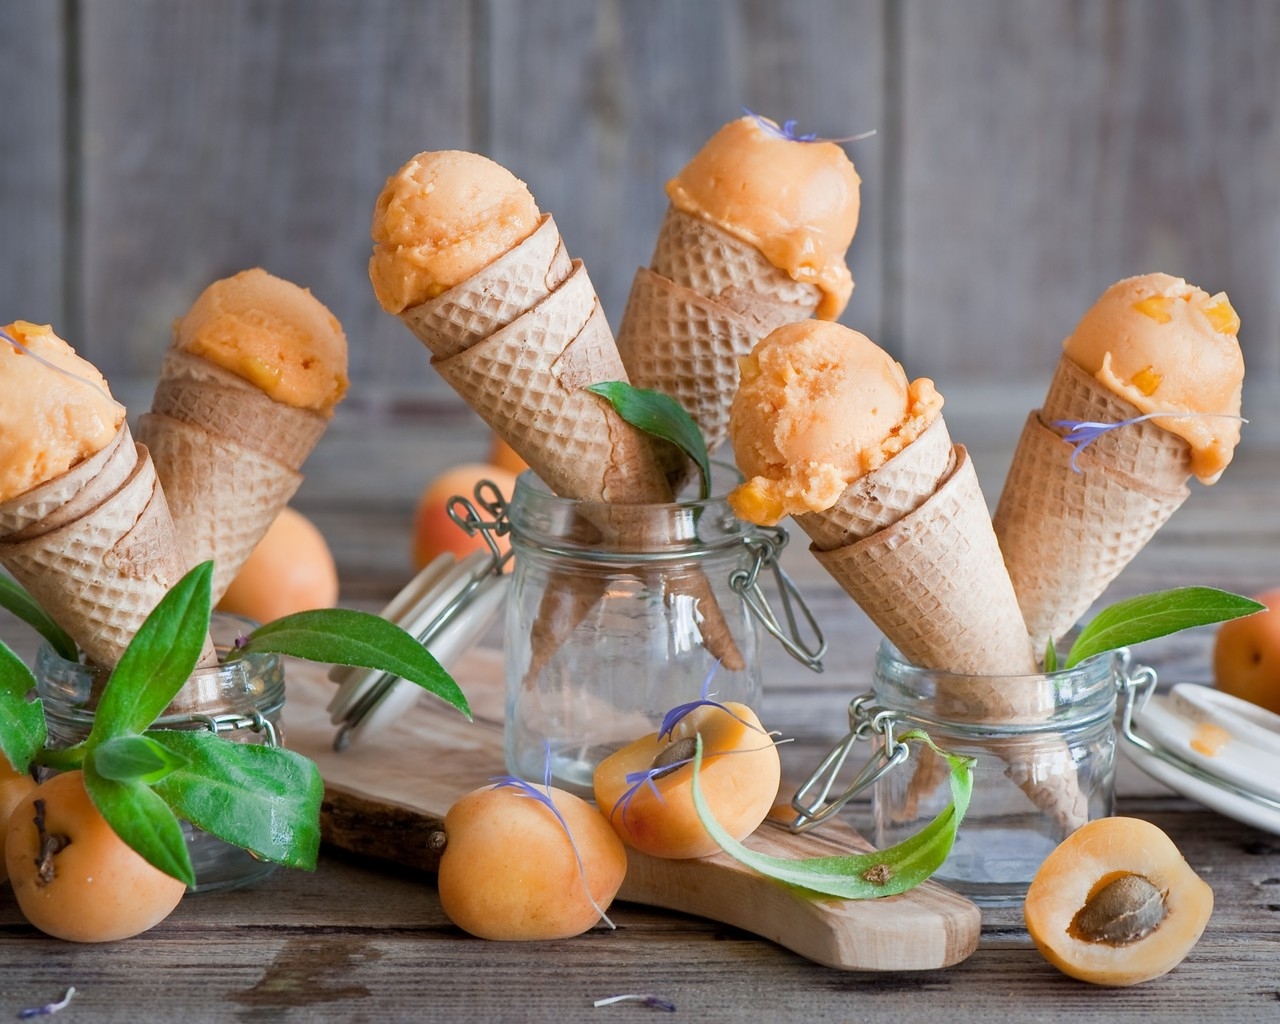 Apricot Ice Cream for 1280 x 1024 resolution